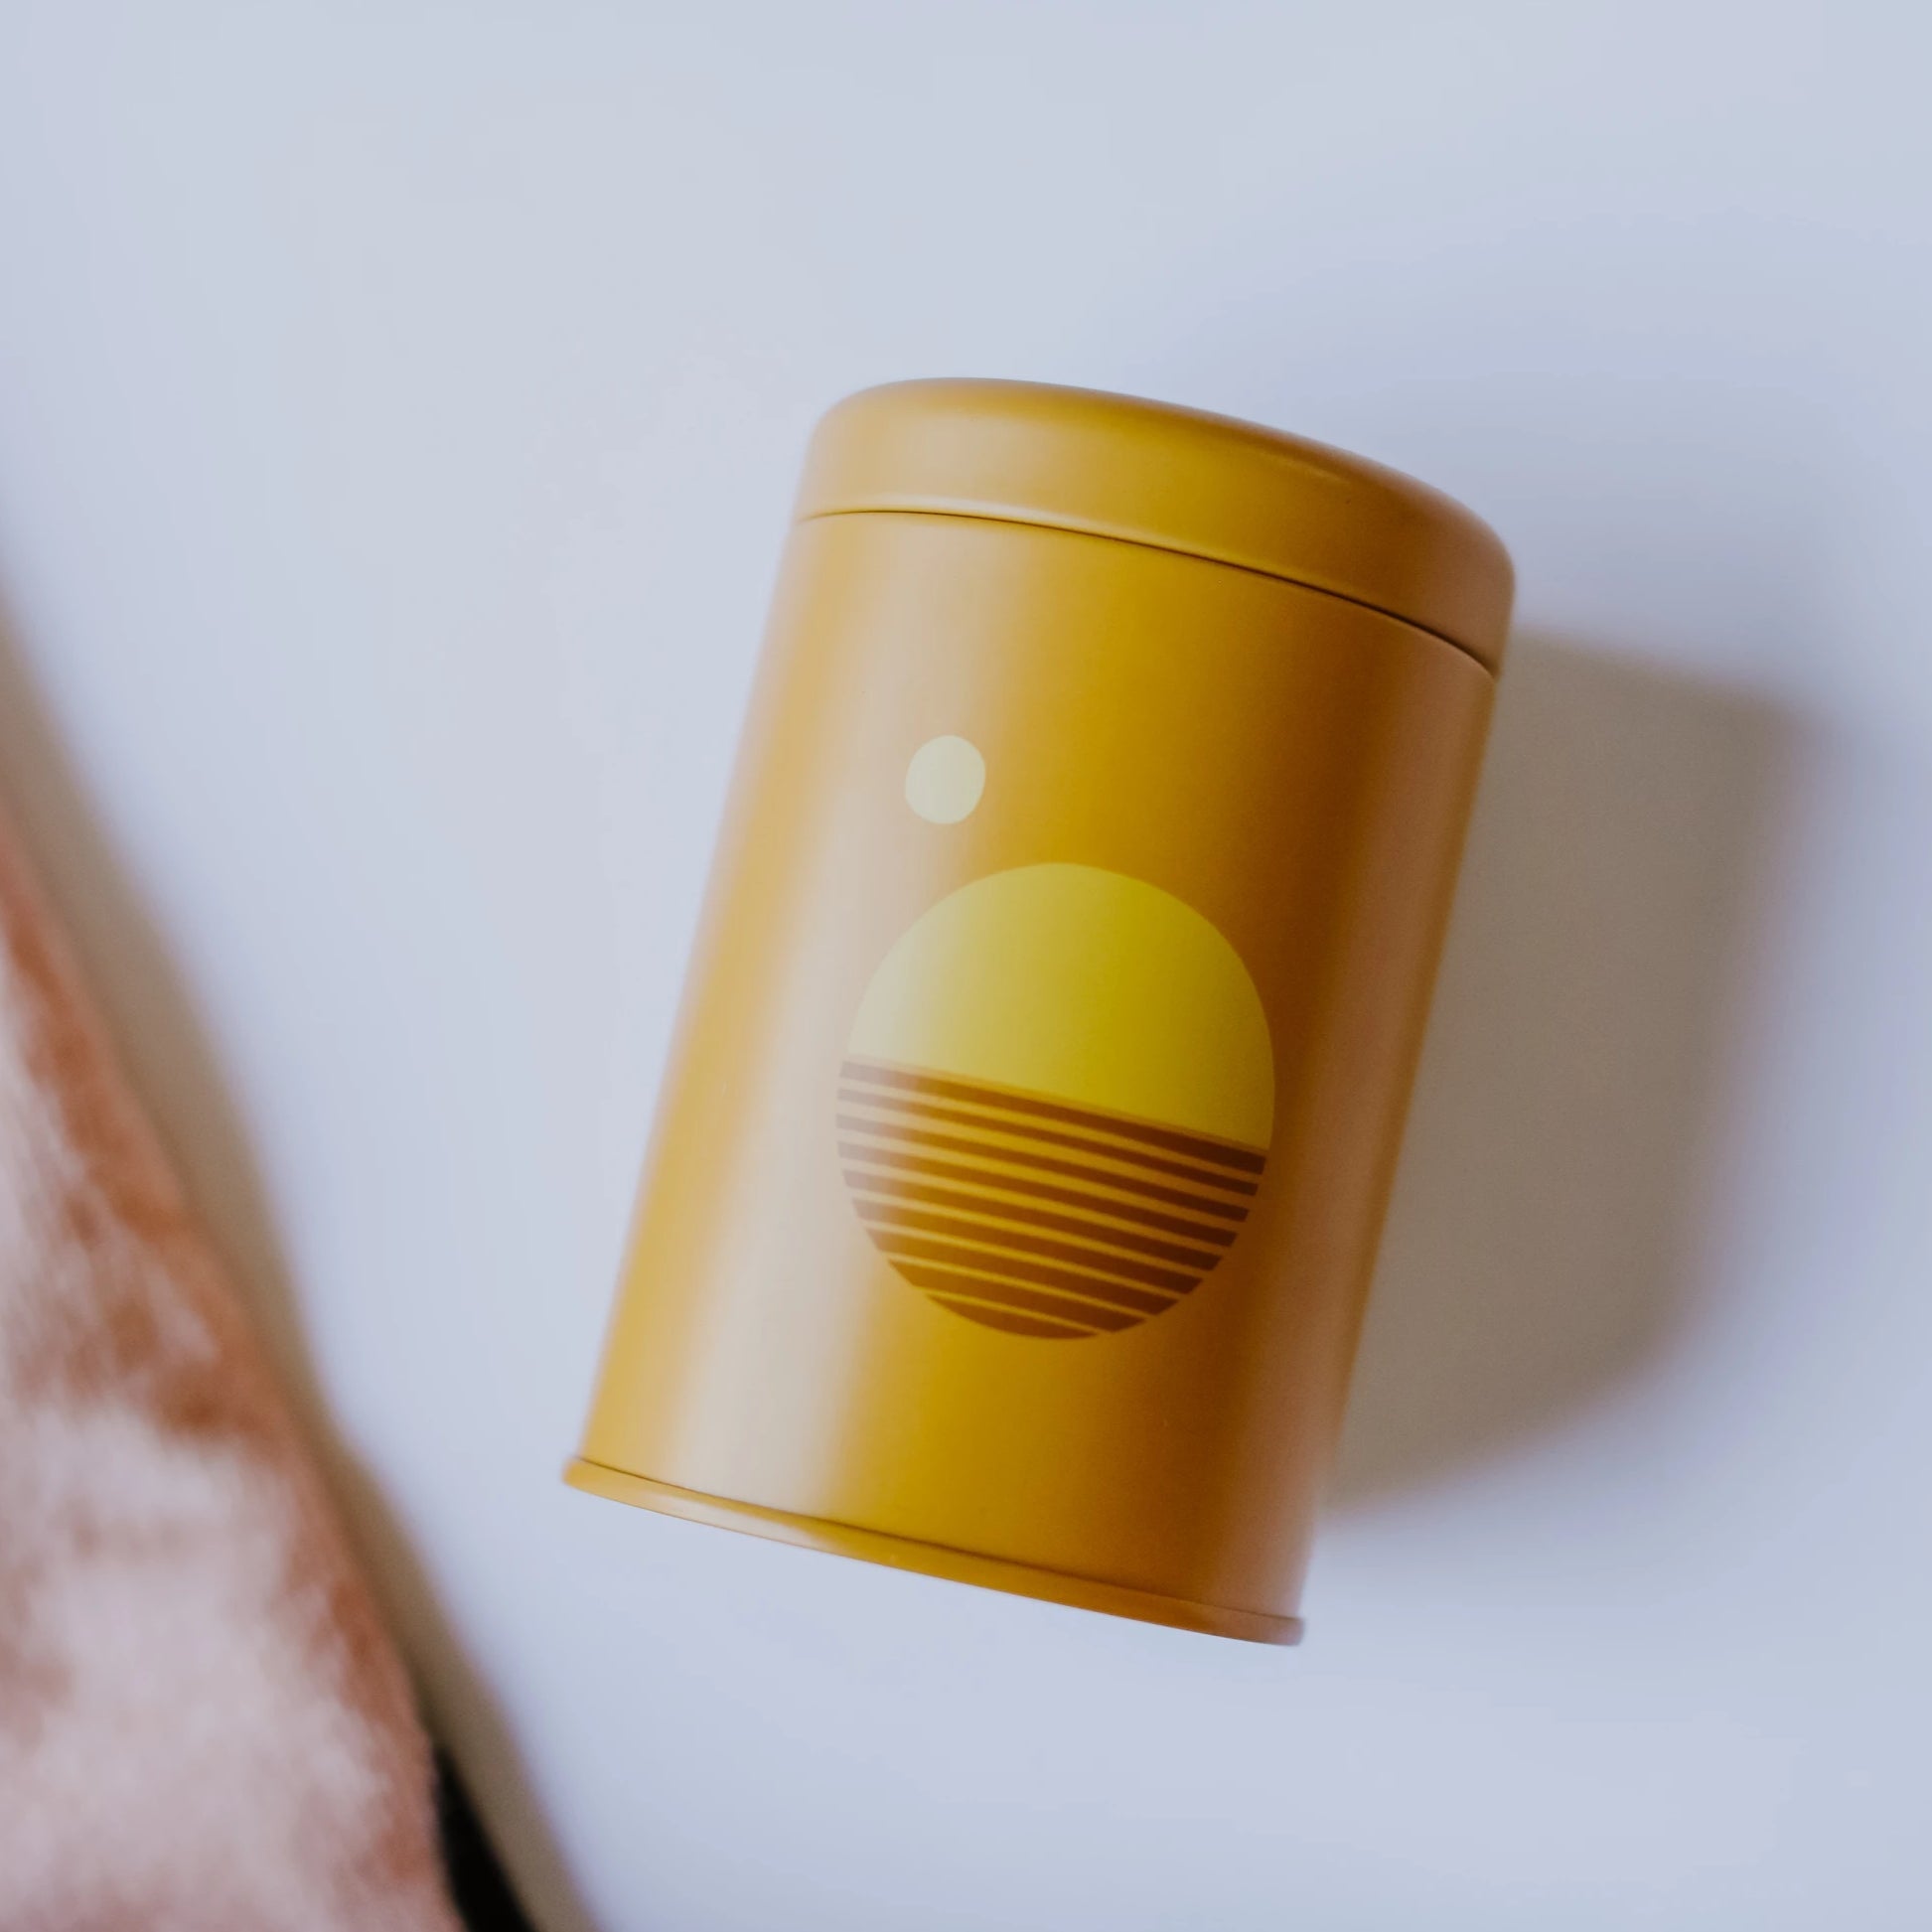 Dark yellow cylinder container with yellow and orange sun.